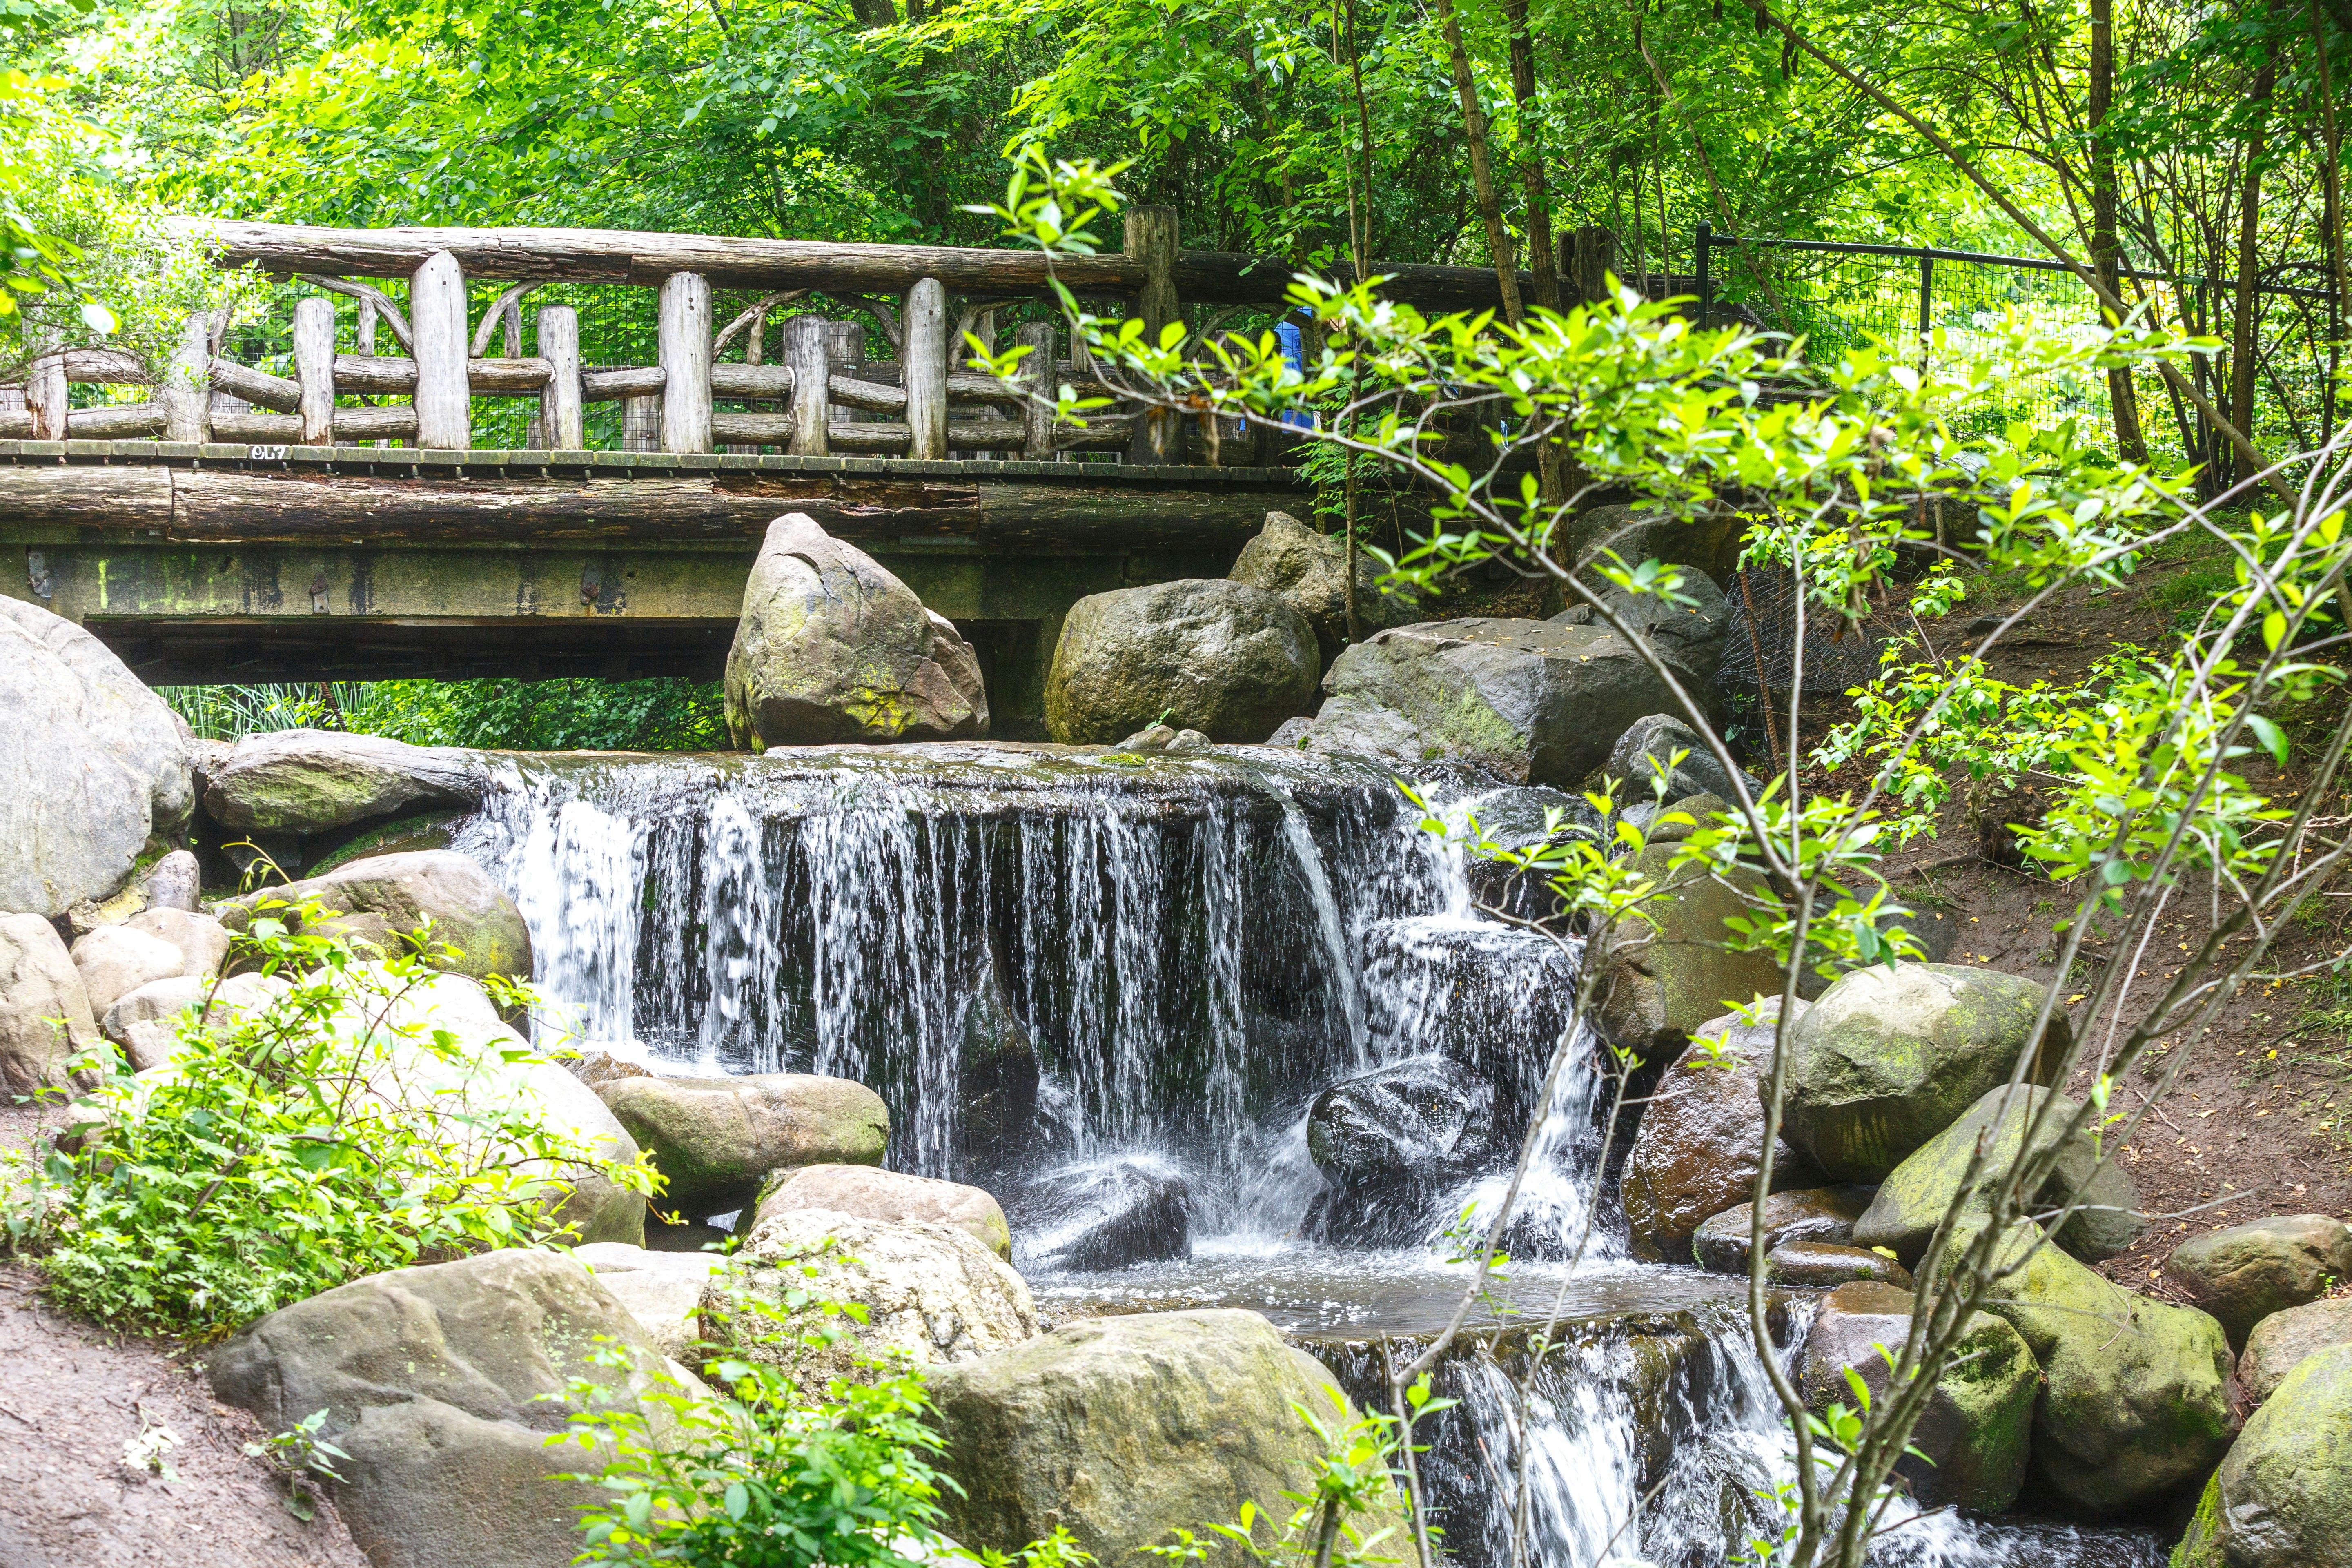 A small waterfall and bridge at Prospect Park in Brooklyn.